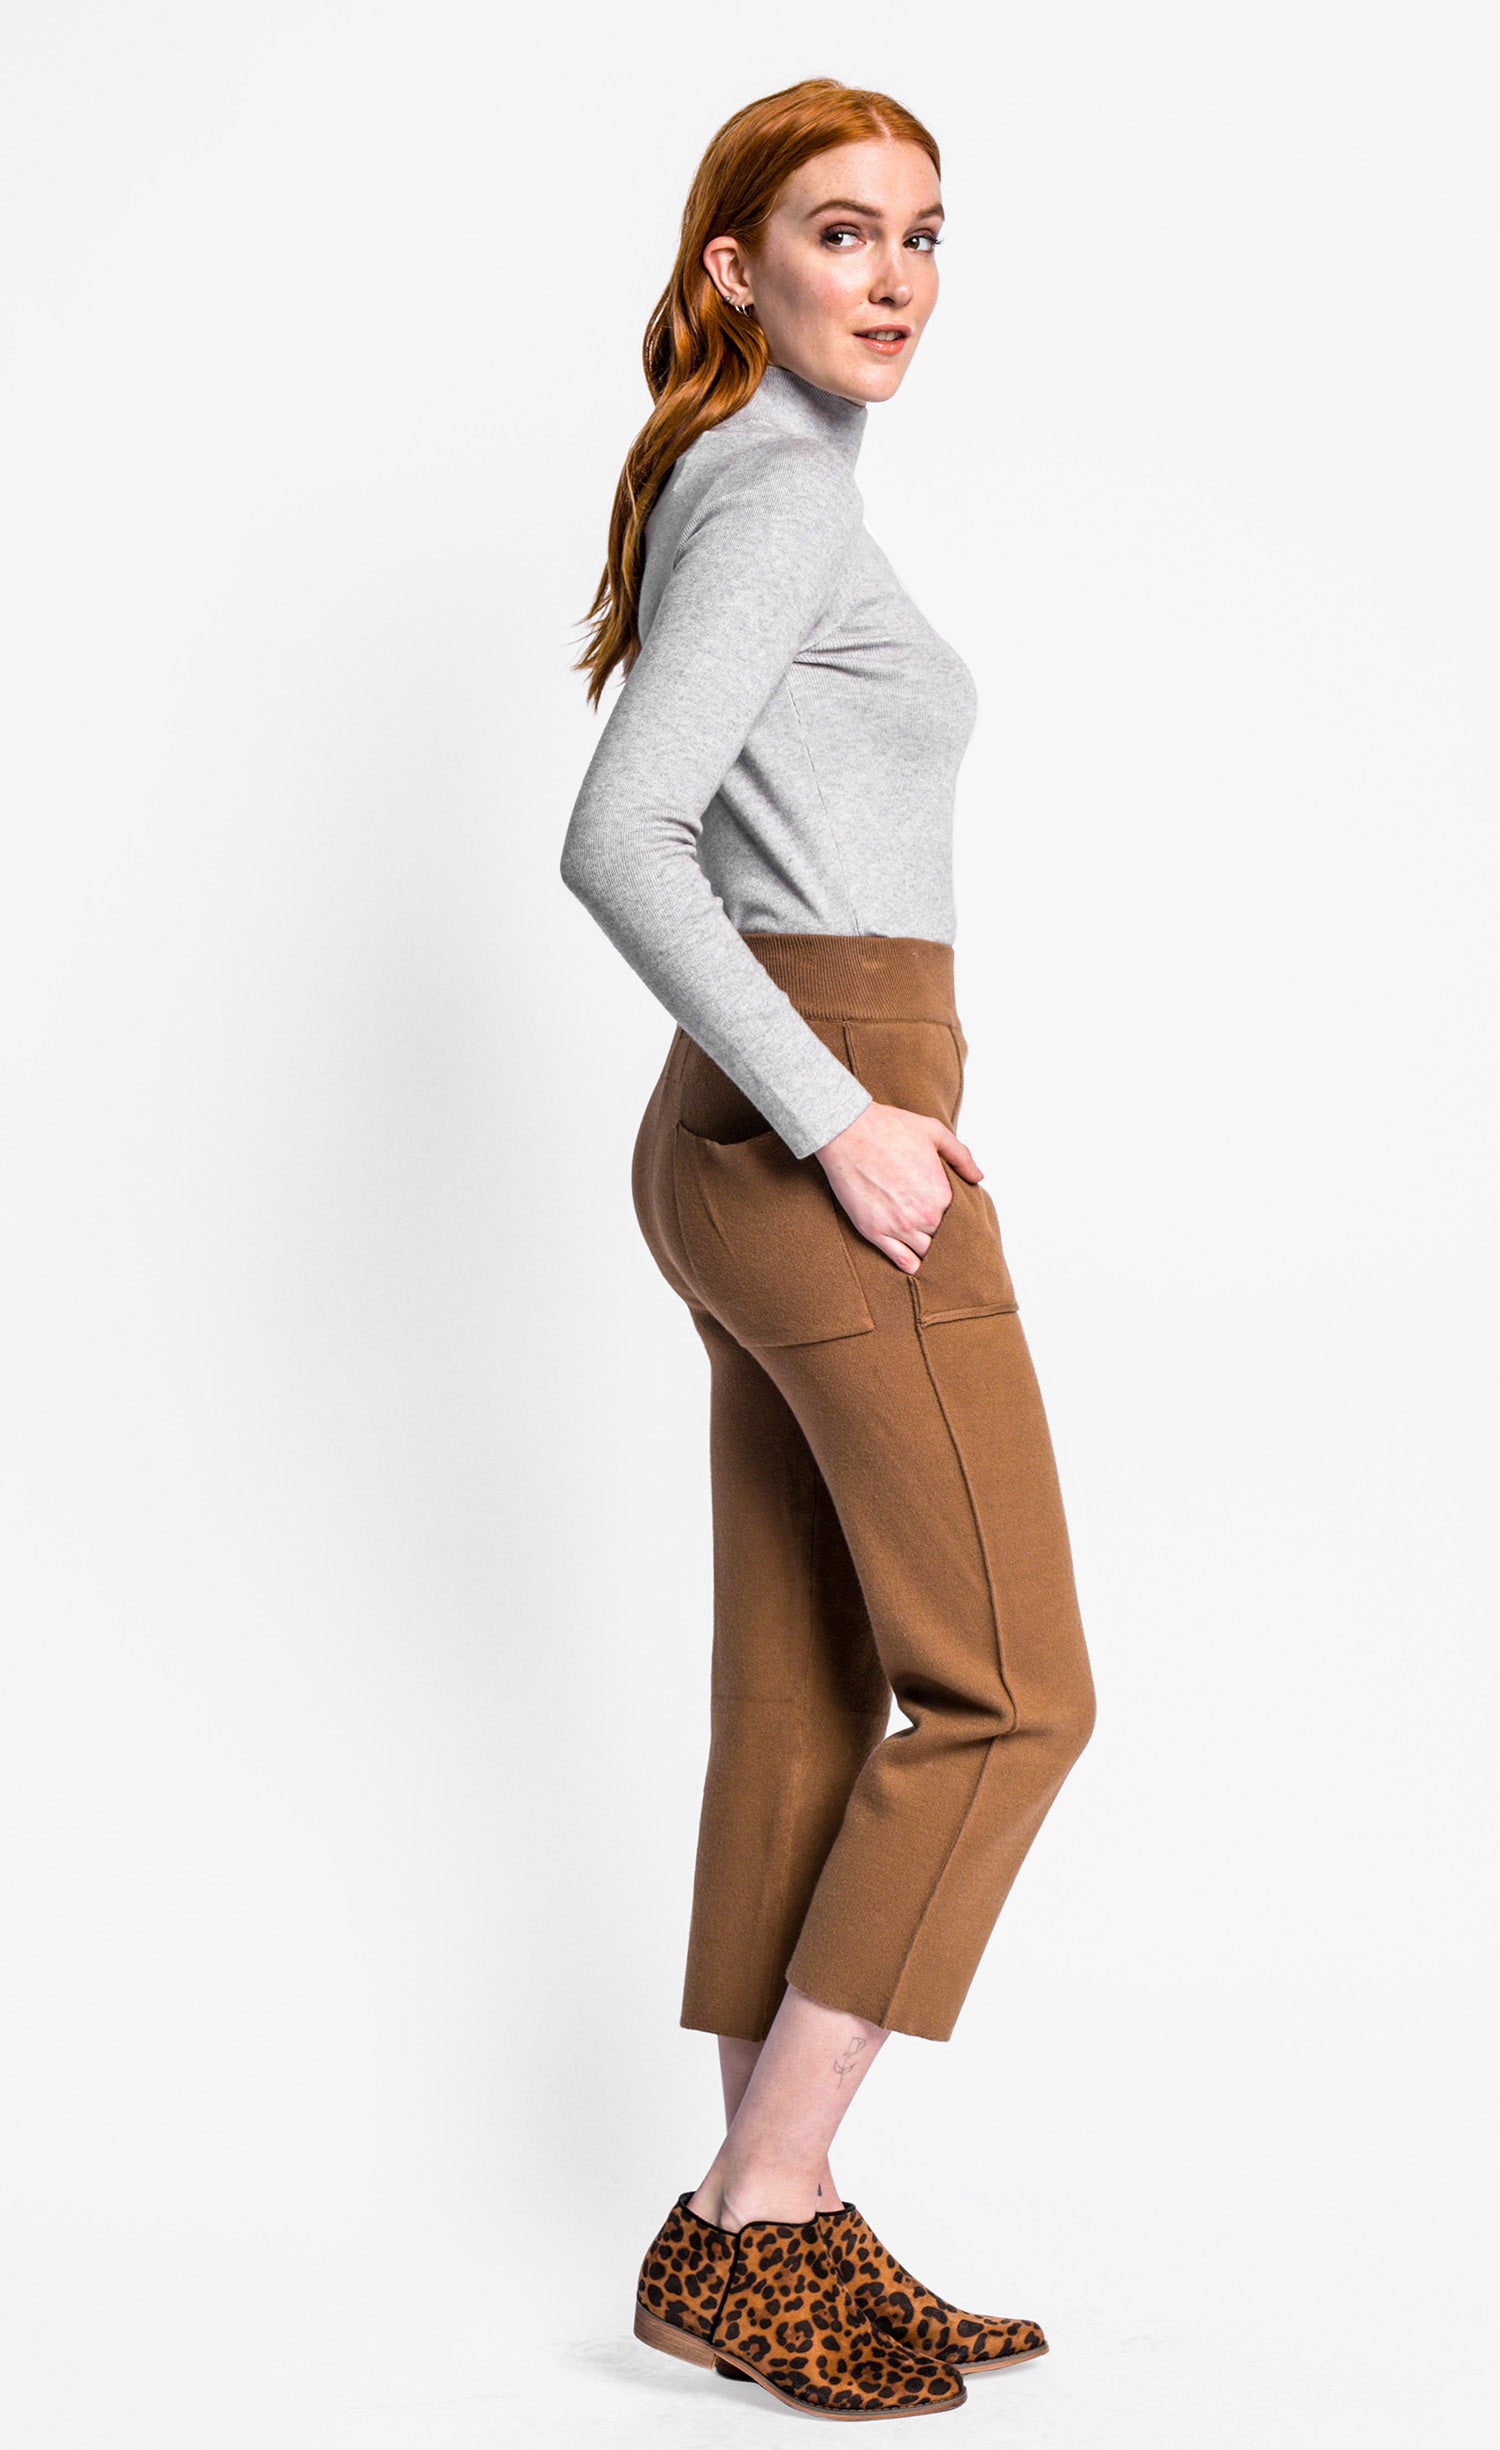 The Ellie Pants - Pink Martini Collection